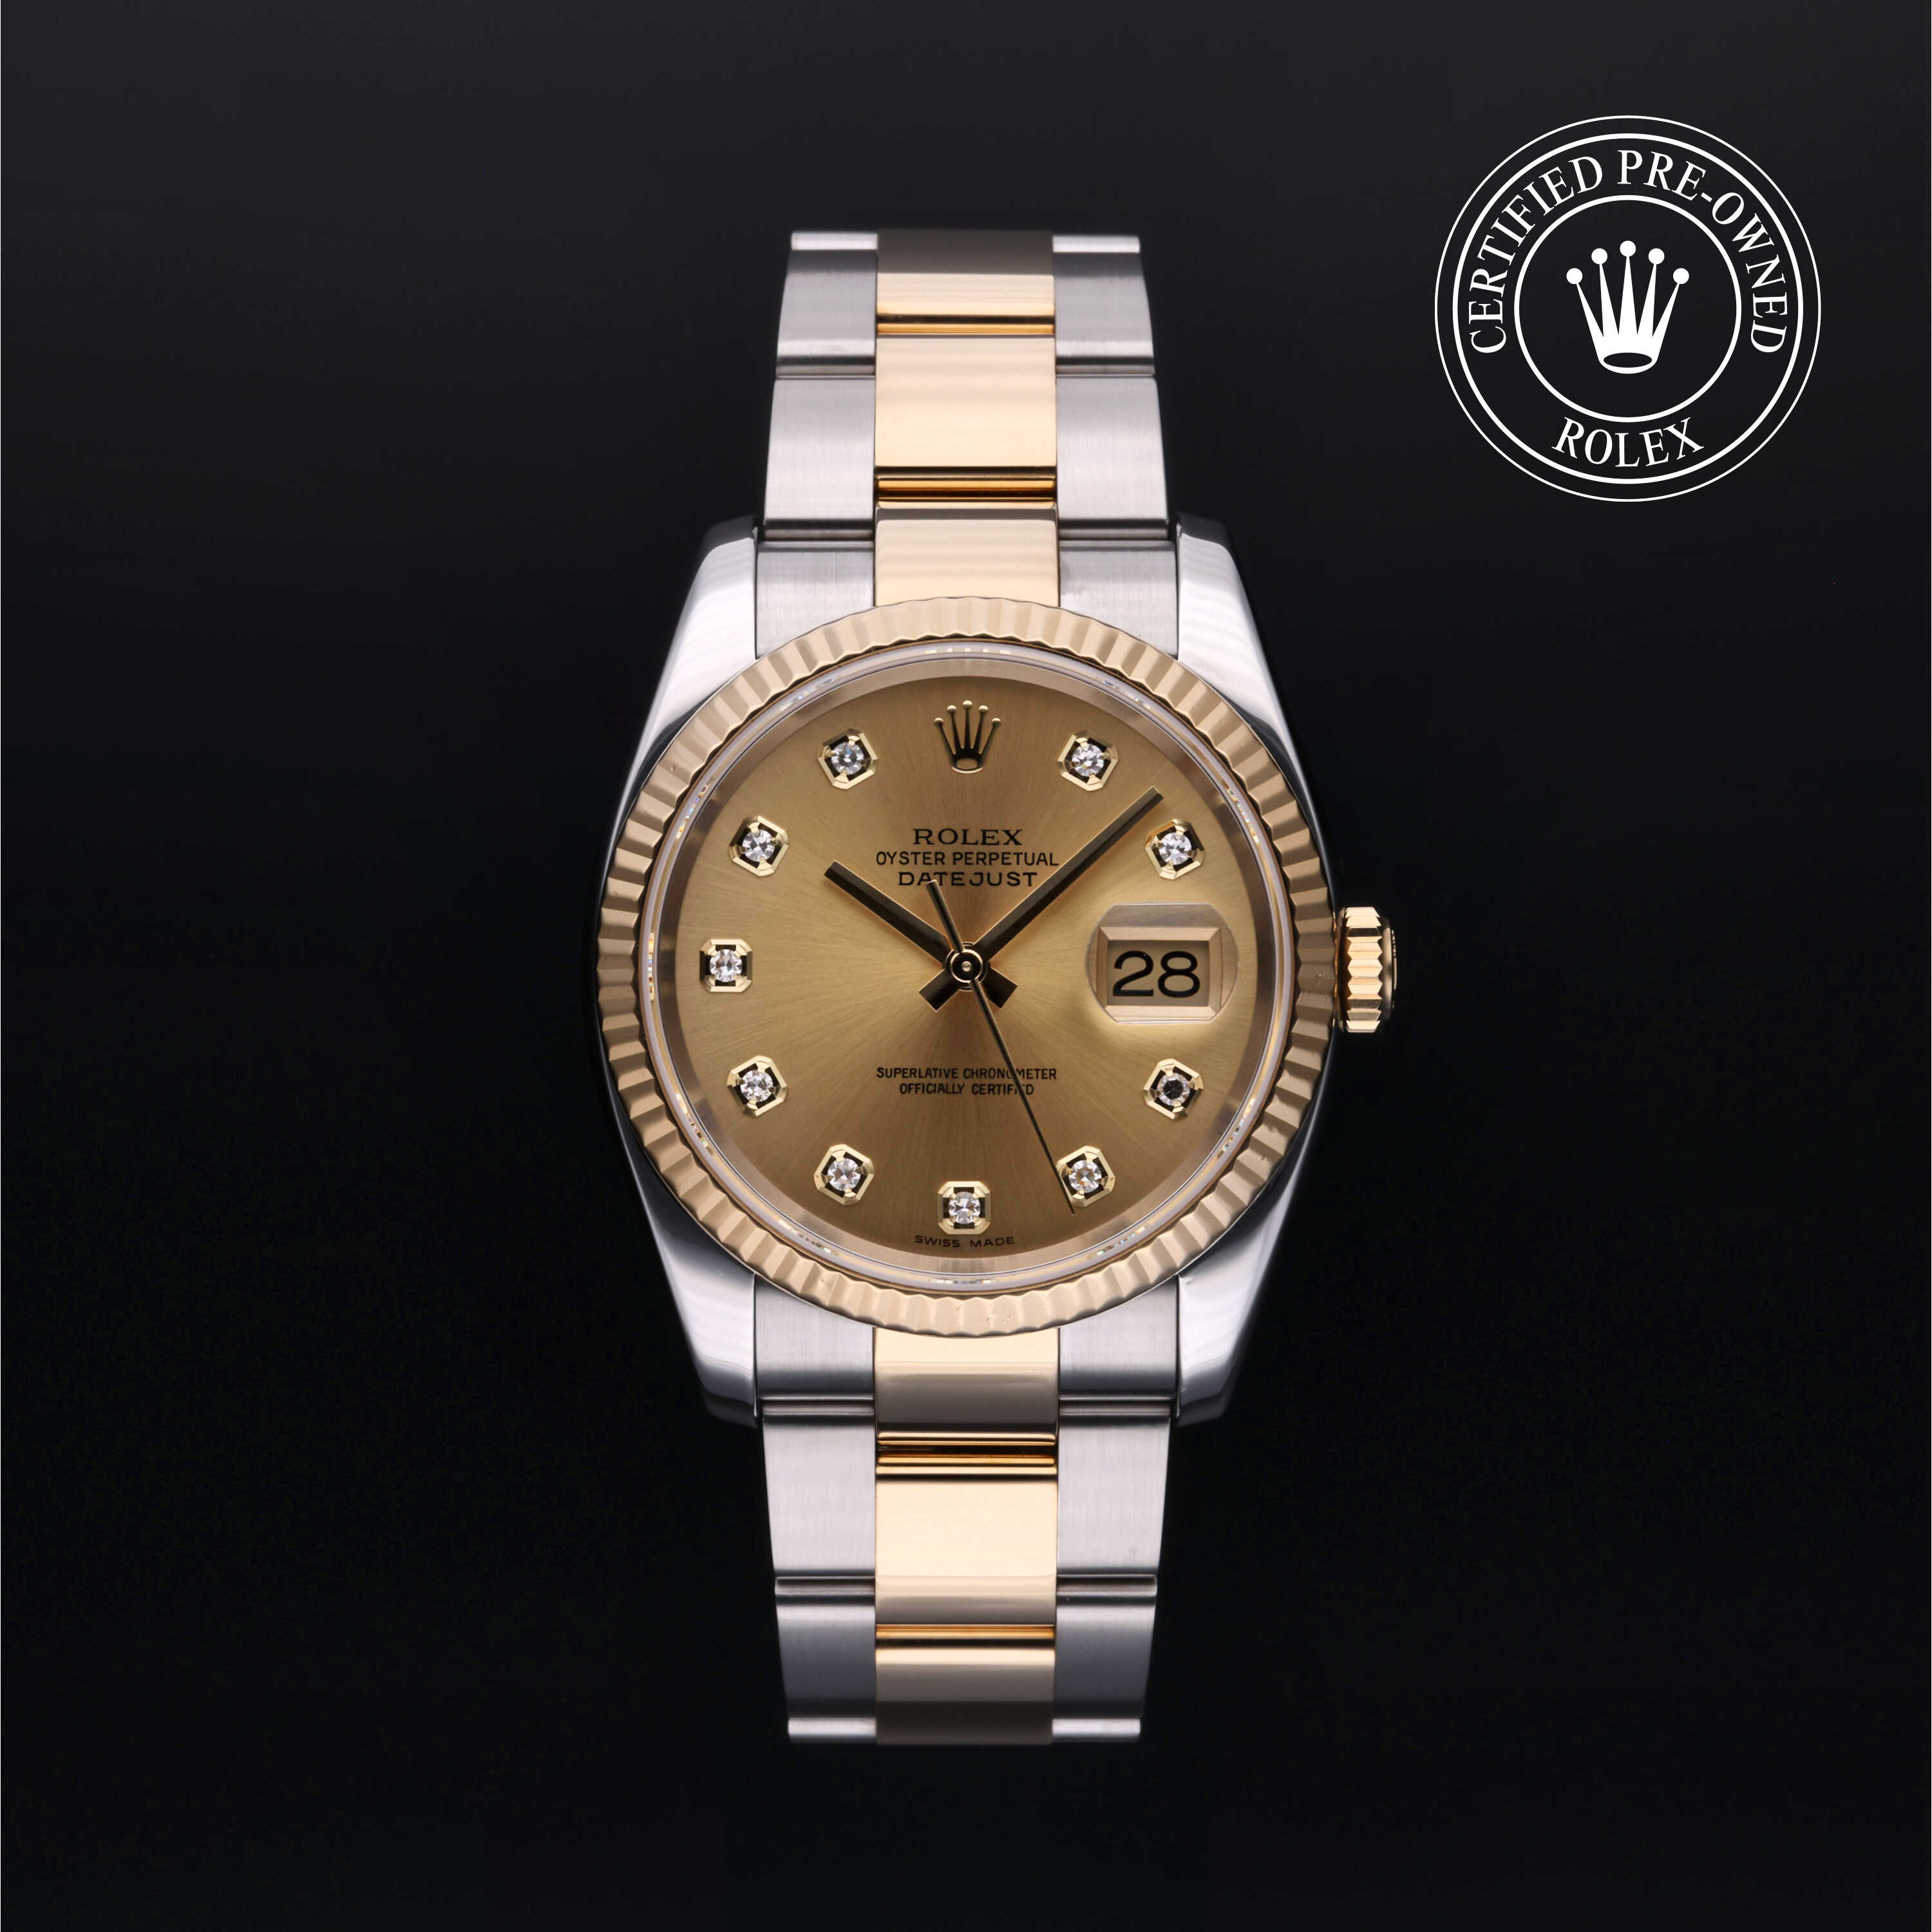 Rolex Certified Pre-Owned Datejust (116233)